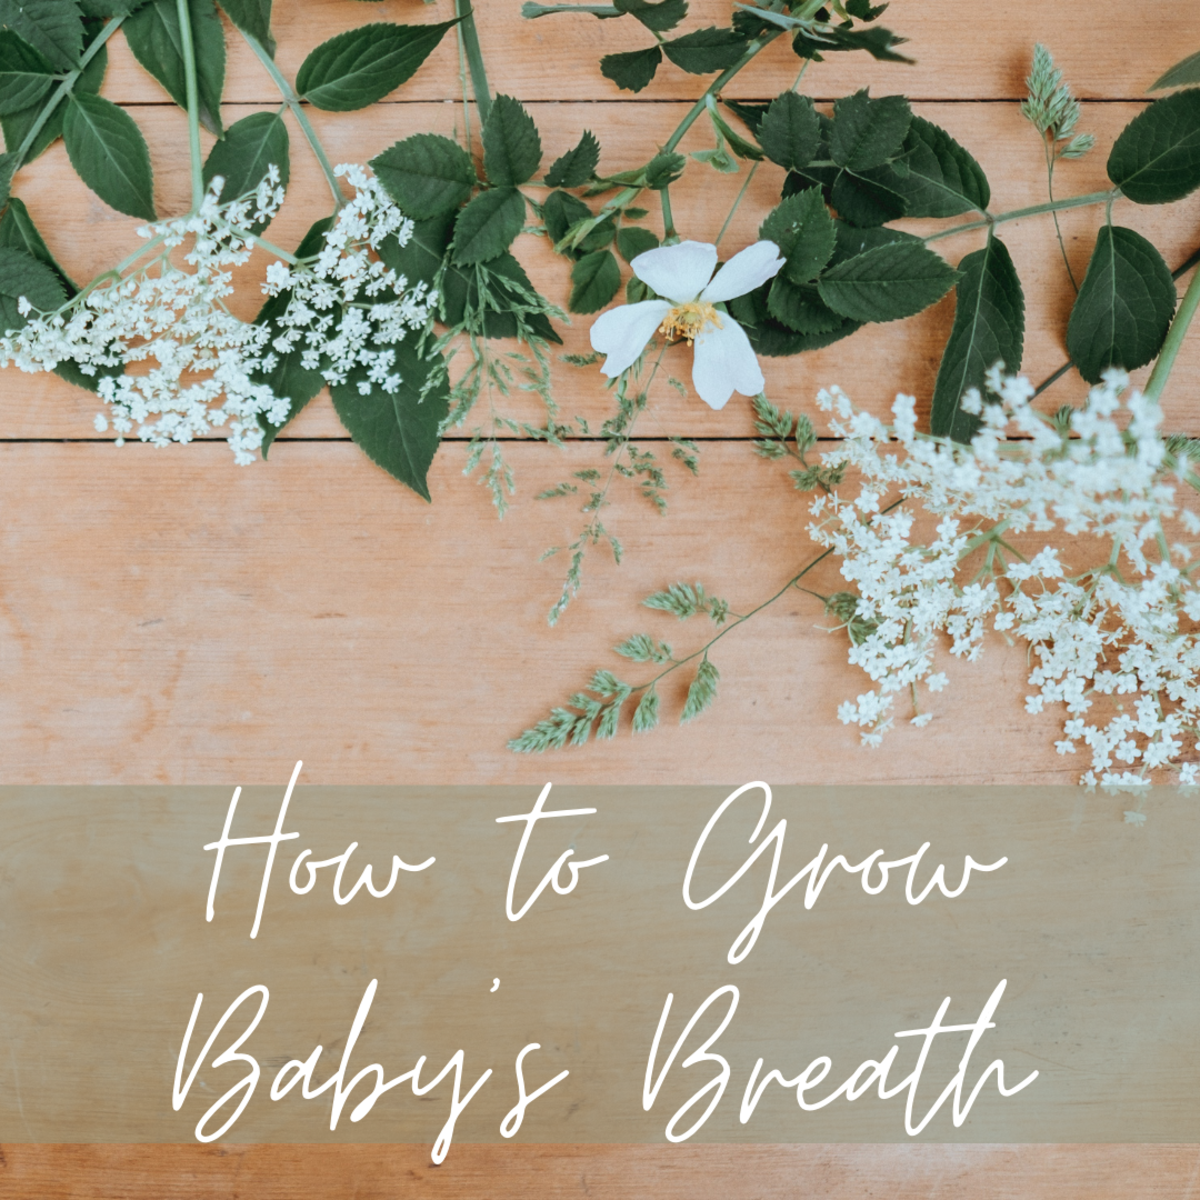 Baby's breath, or gypsophilia, is a common fixture in floral arrangements for all occasions, and this article will show you how to grow and care for them.